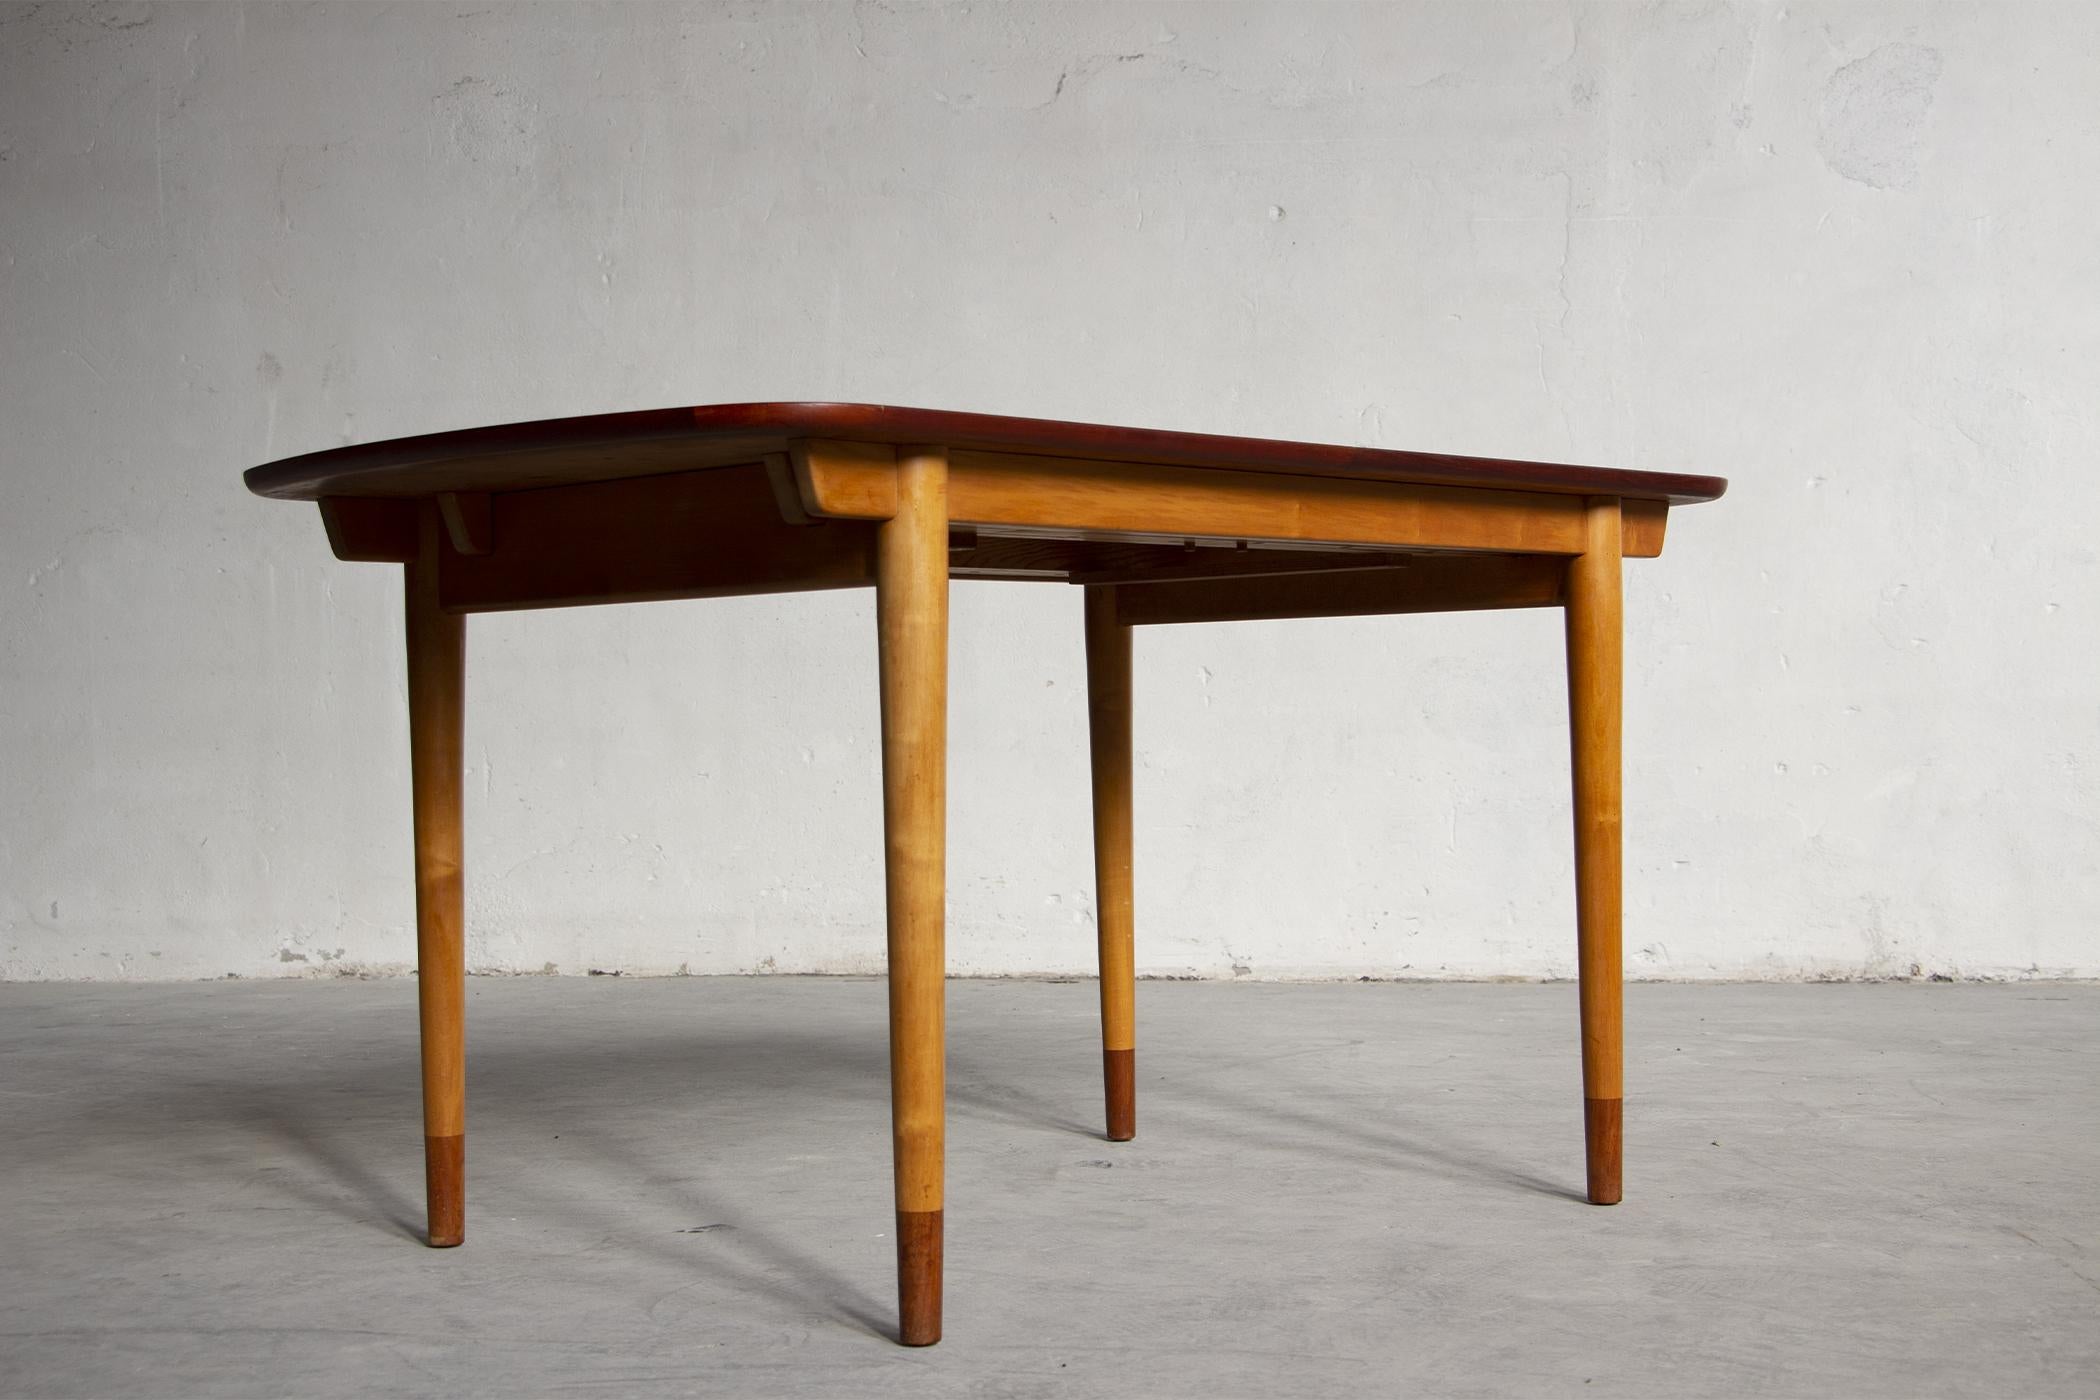 Rare and exceptional Finn Juhl dining table with rectangular teak veneer top with two maple veneer extensions that can be stored under the central top. The structure is in solid maple, tapered legs with solid teak tips. Designed in 1949. Produced by